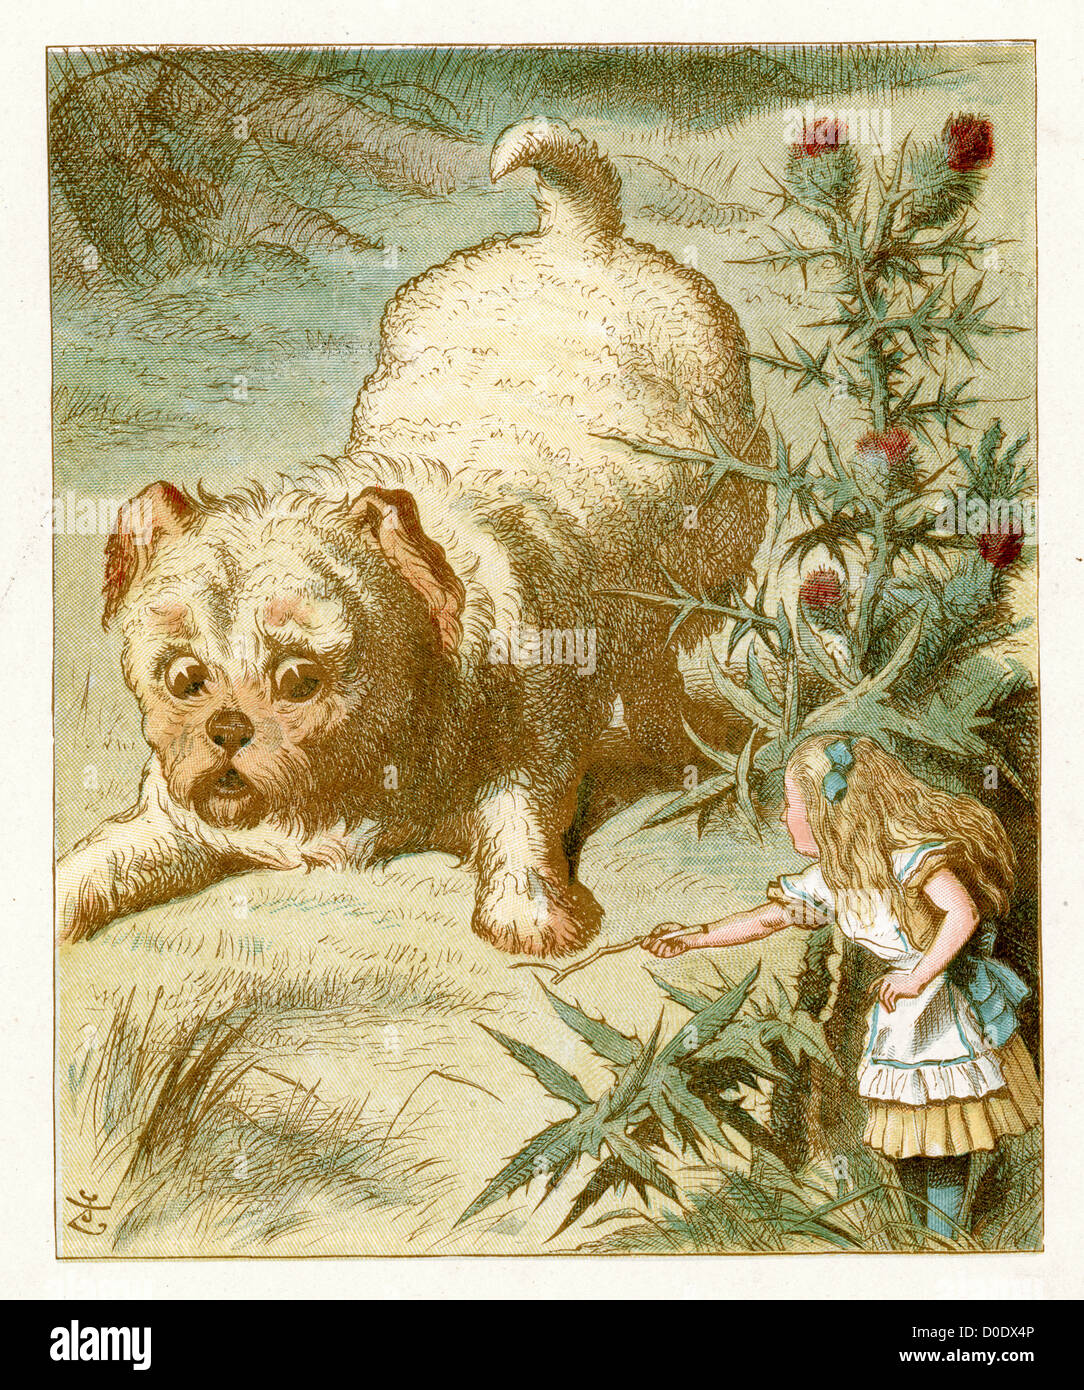 https://c8.alamy.com/comp/D0DX4P/the-dear-little-puppy-from-the-lewis-carroll-story-alice-in-wonderland-D0DX4P.jpg